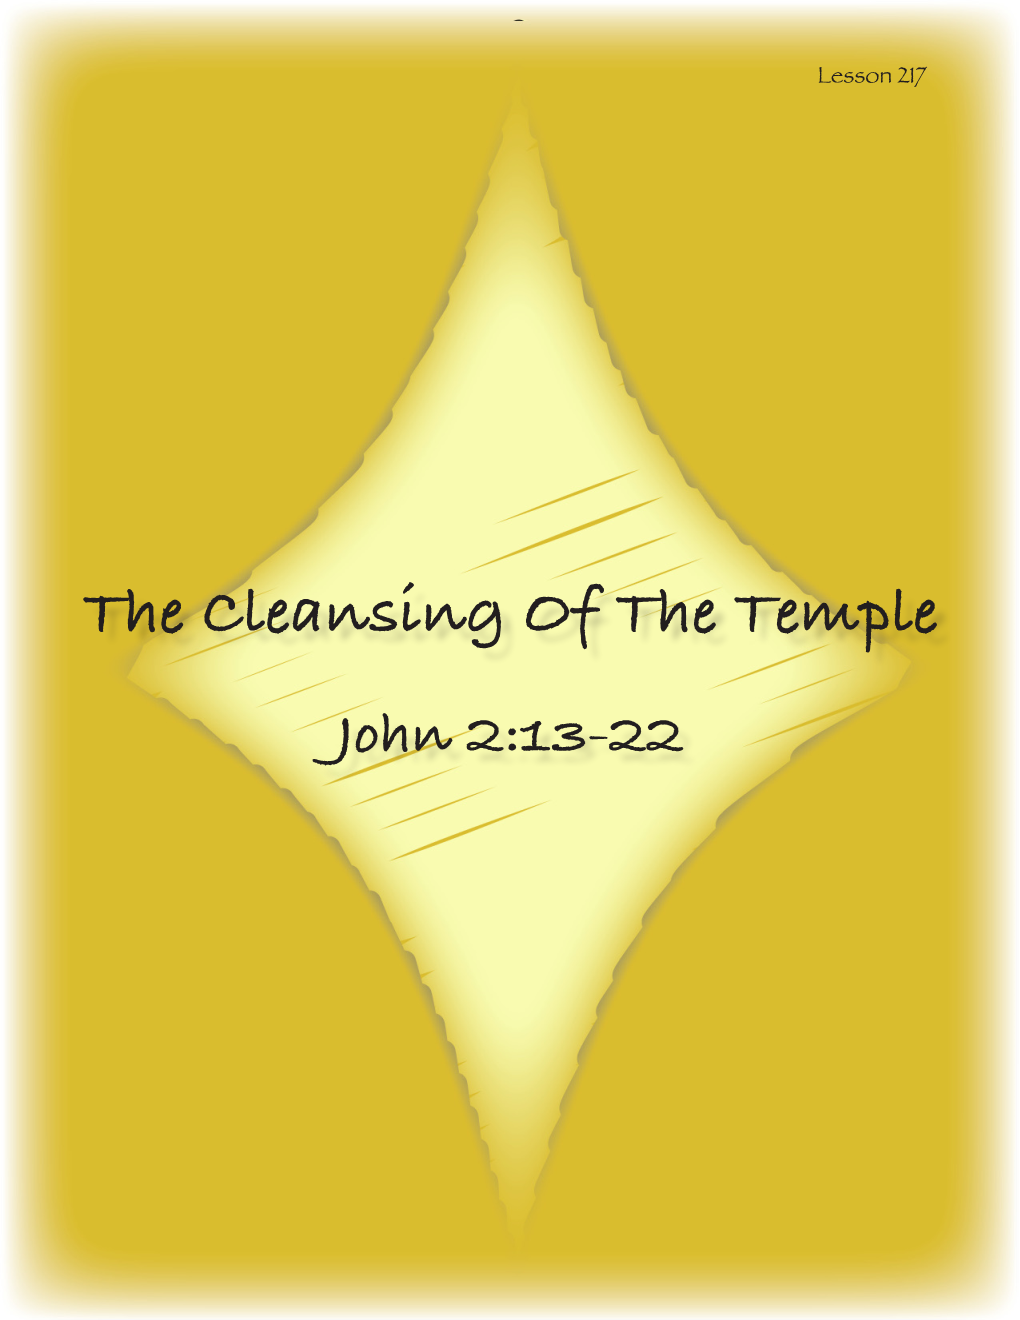 The Cleansing of the Temple John 2:13-22 MEMORY VERSE JOHN 2:17 “Then His Disciples Rem Em Bered That It Was Written, "Zeal for Your House Has Eaten Me Up.”